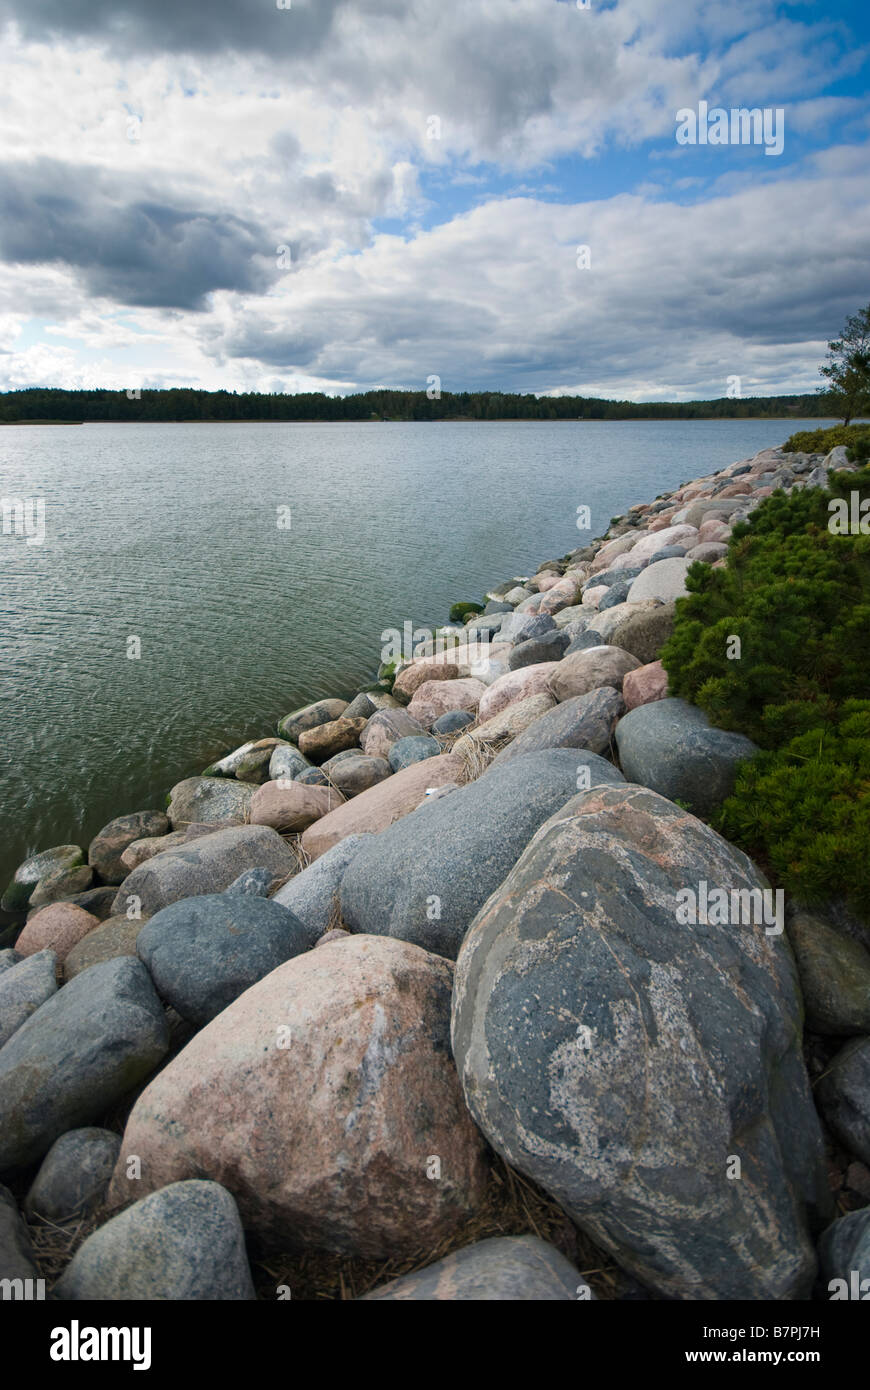 Boulders on the edge of the water Stock Photo